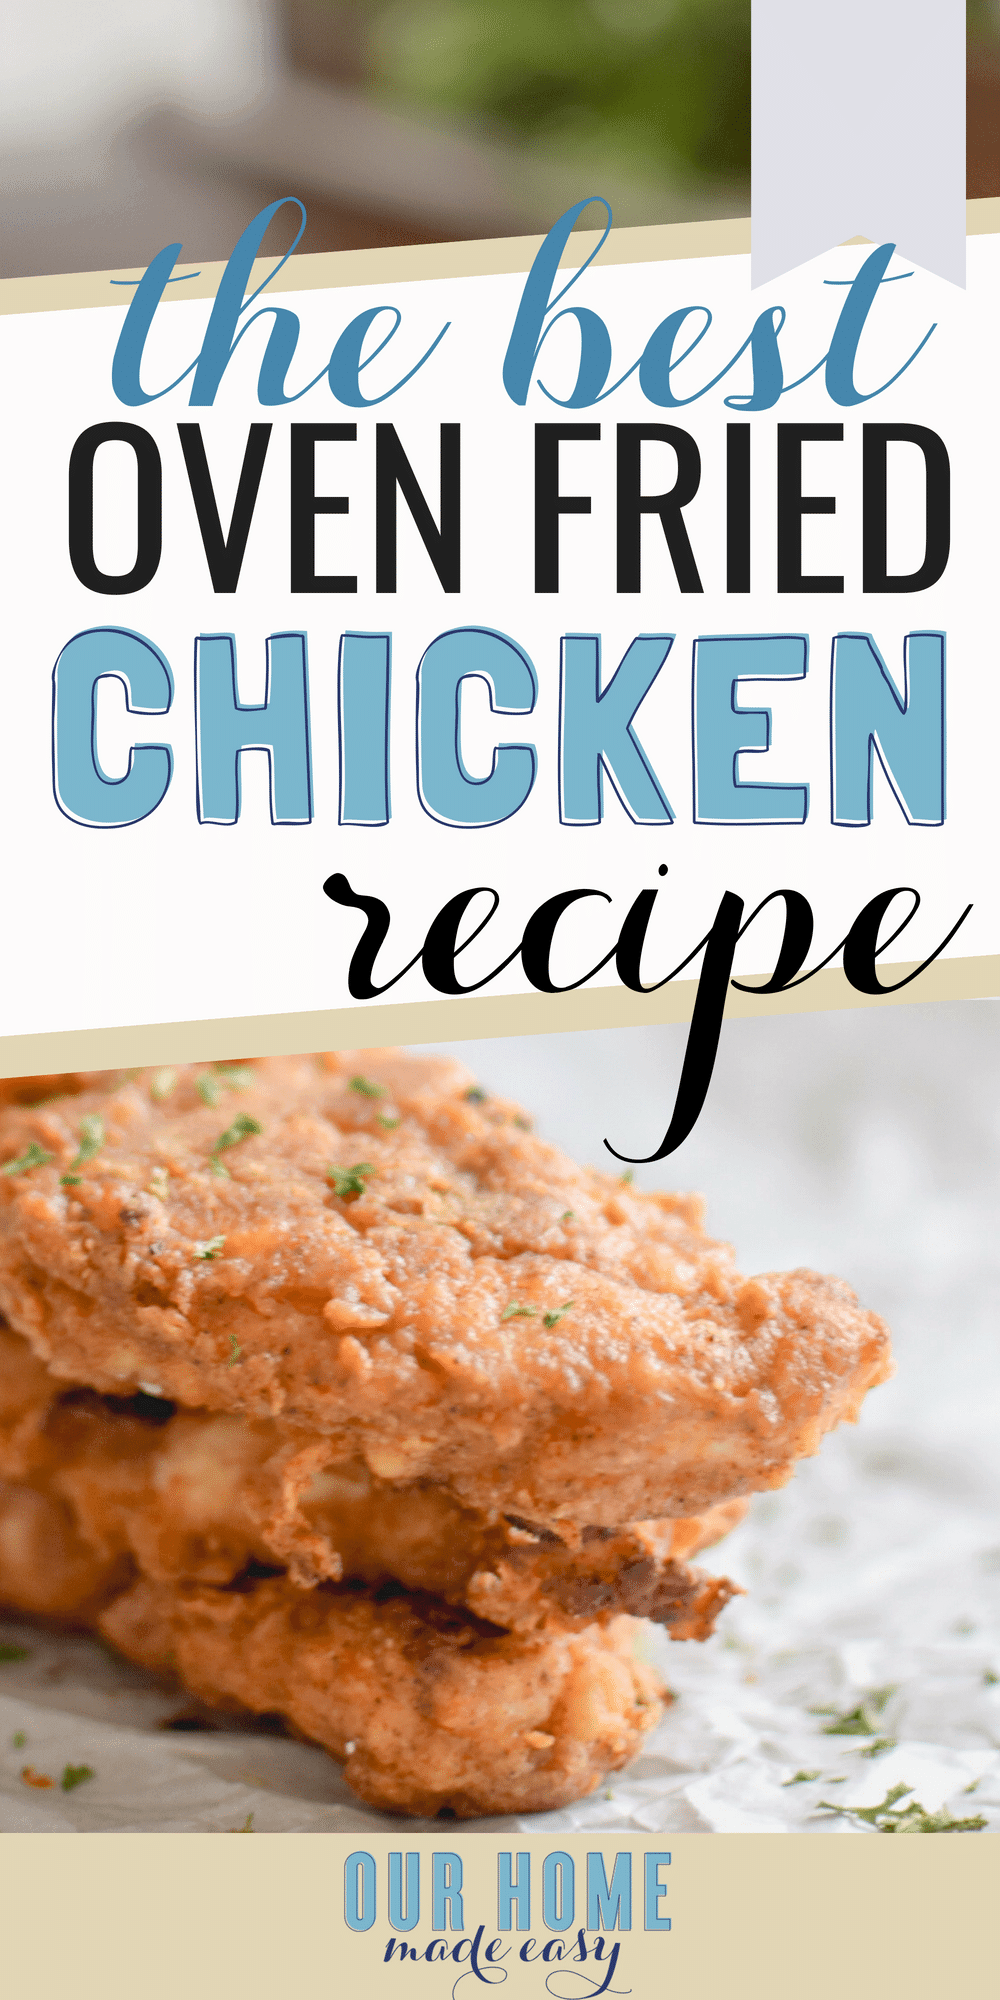 The best oven baked chicken recipe that's perfect for so many dinner ideas. Quick, easy, and healthy.